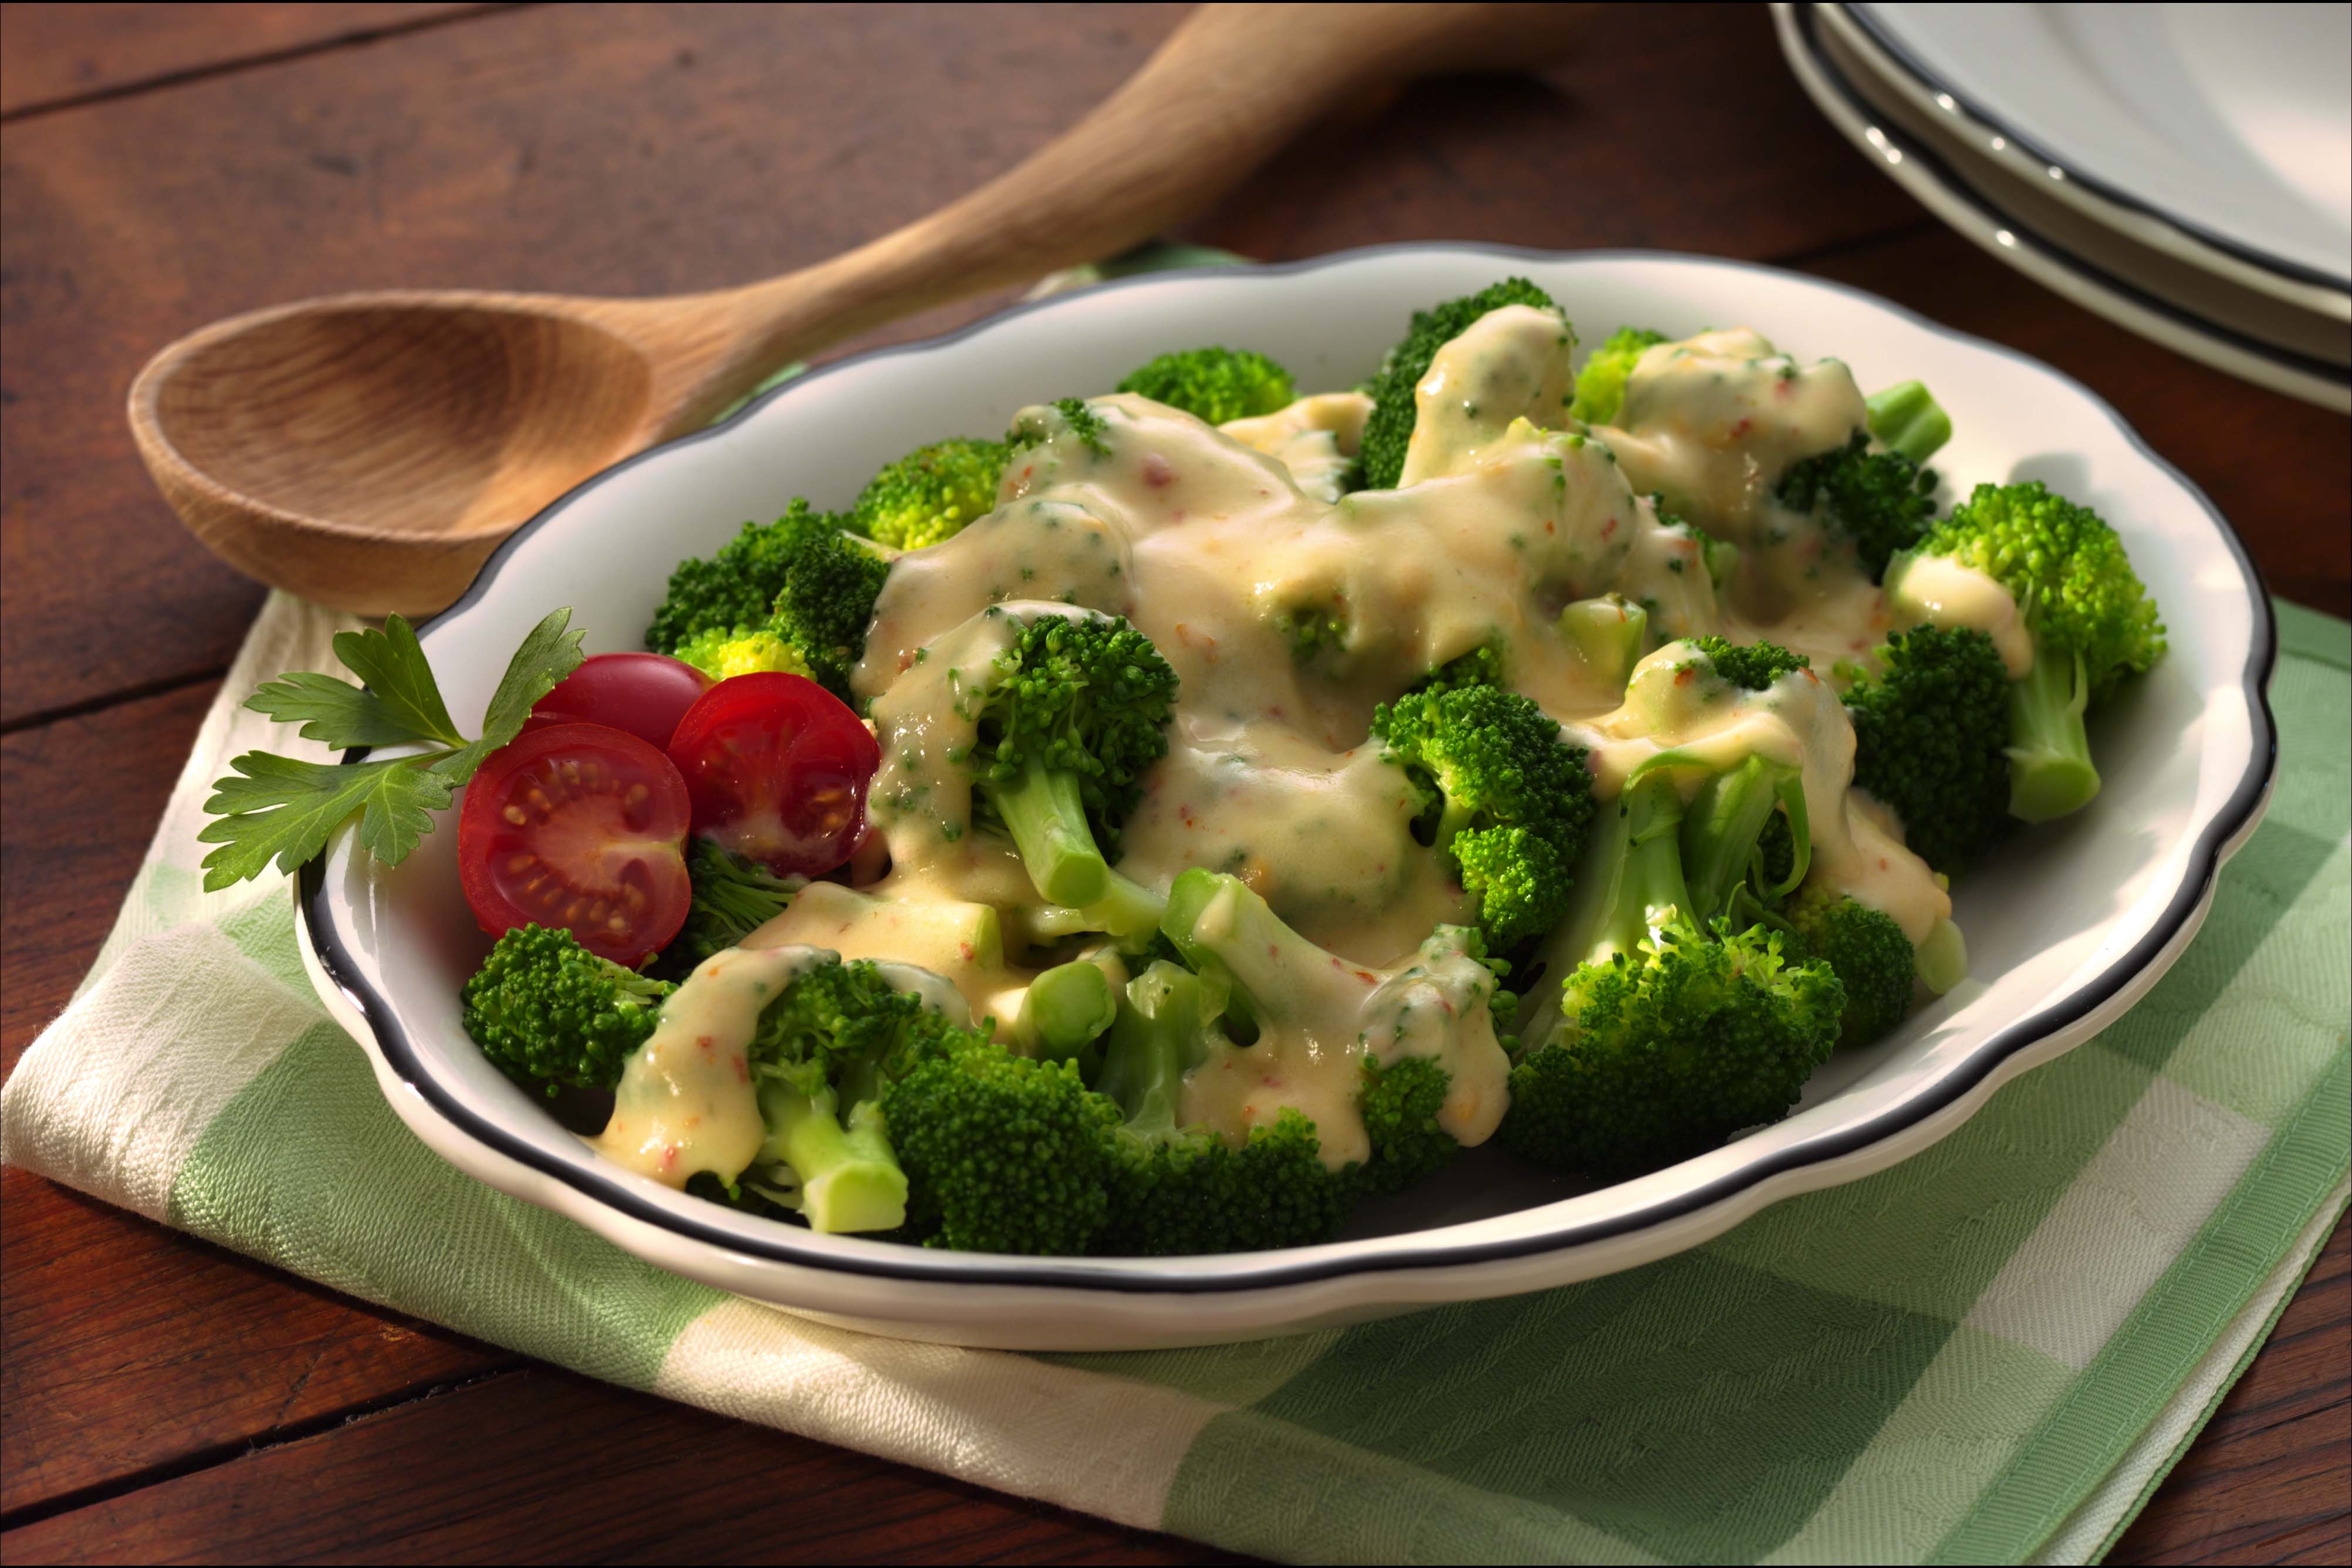 Broccoli And Cheese Sauce Appetizer Recipe | Sargento® Shredded Nacho ...